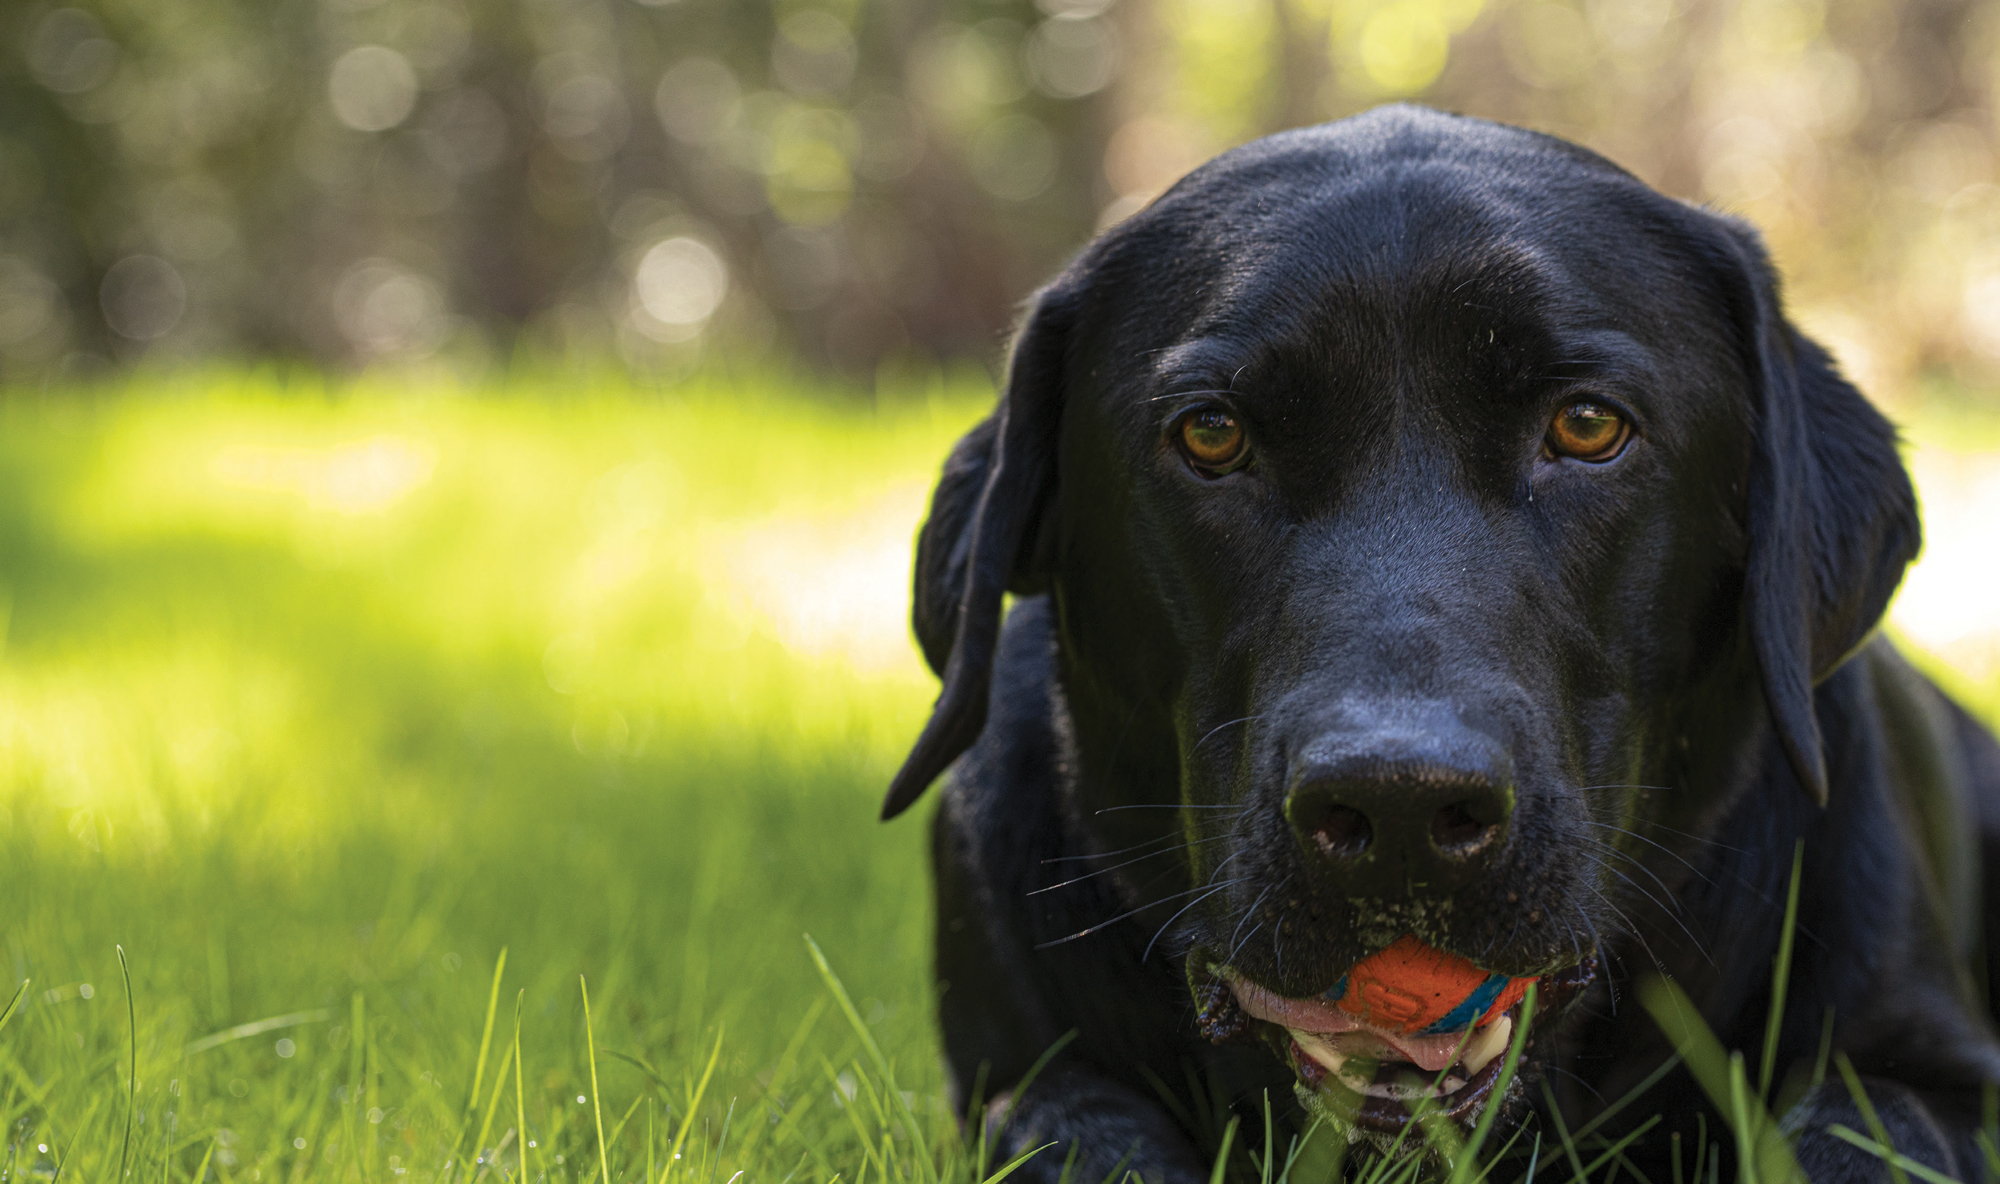 A black Labrador with amber eyes named Jasper lays in the grass with an orange and blue ball in his mouth.